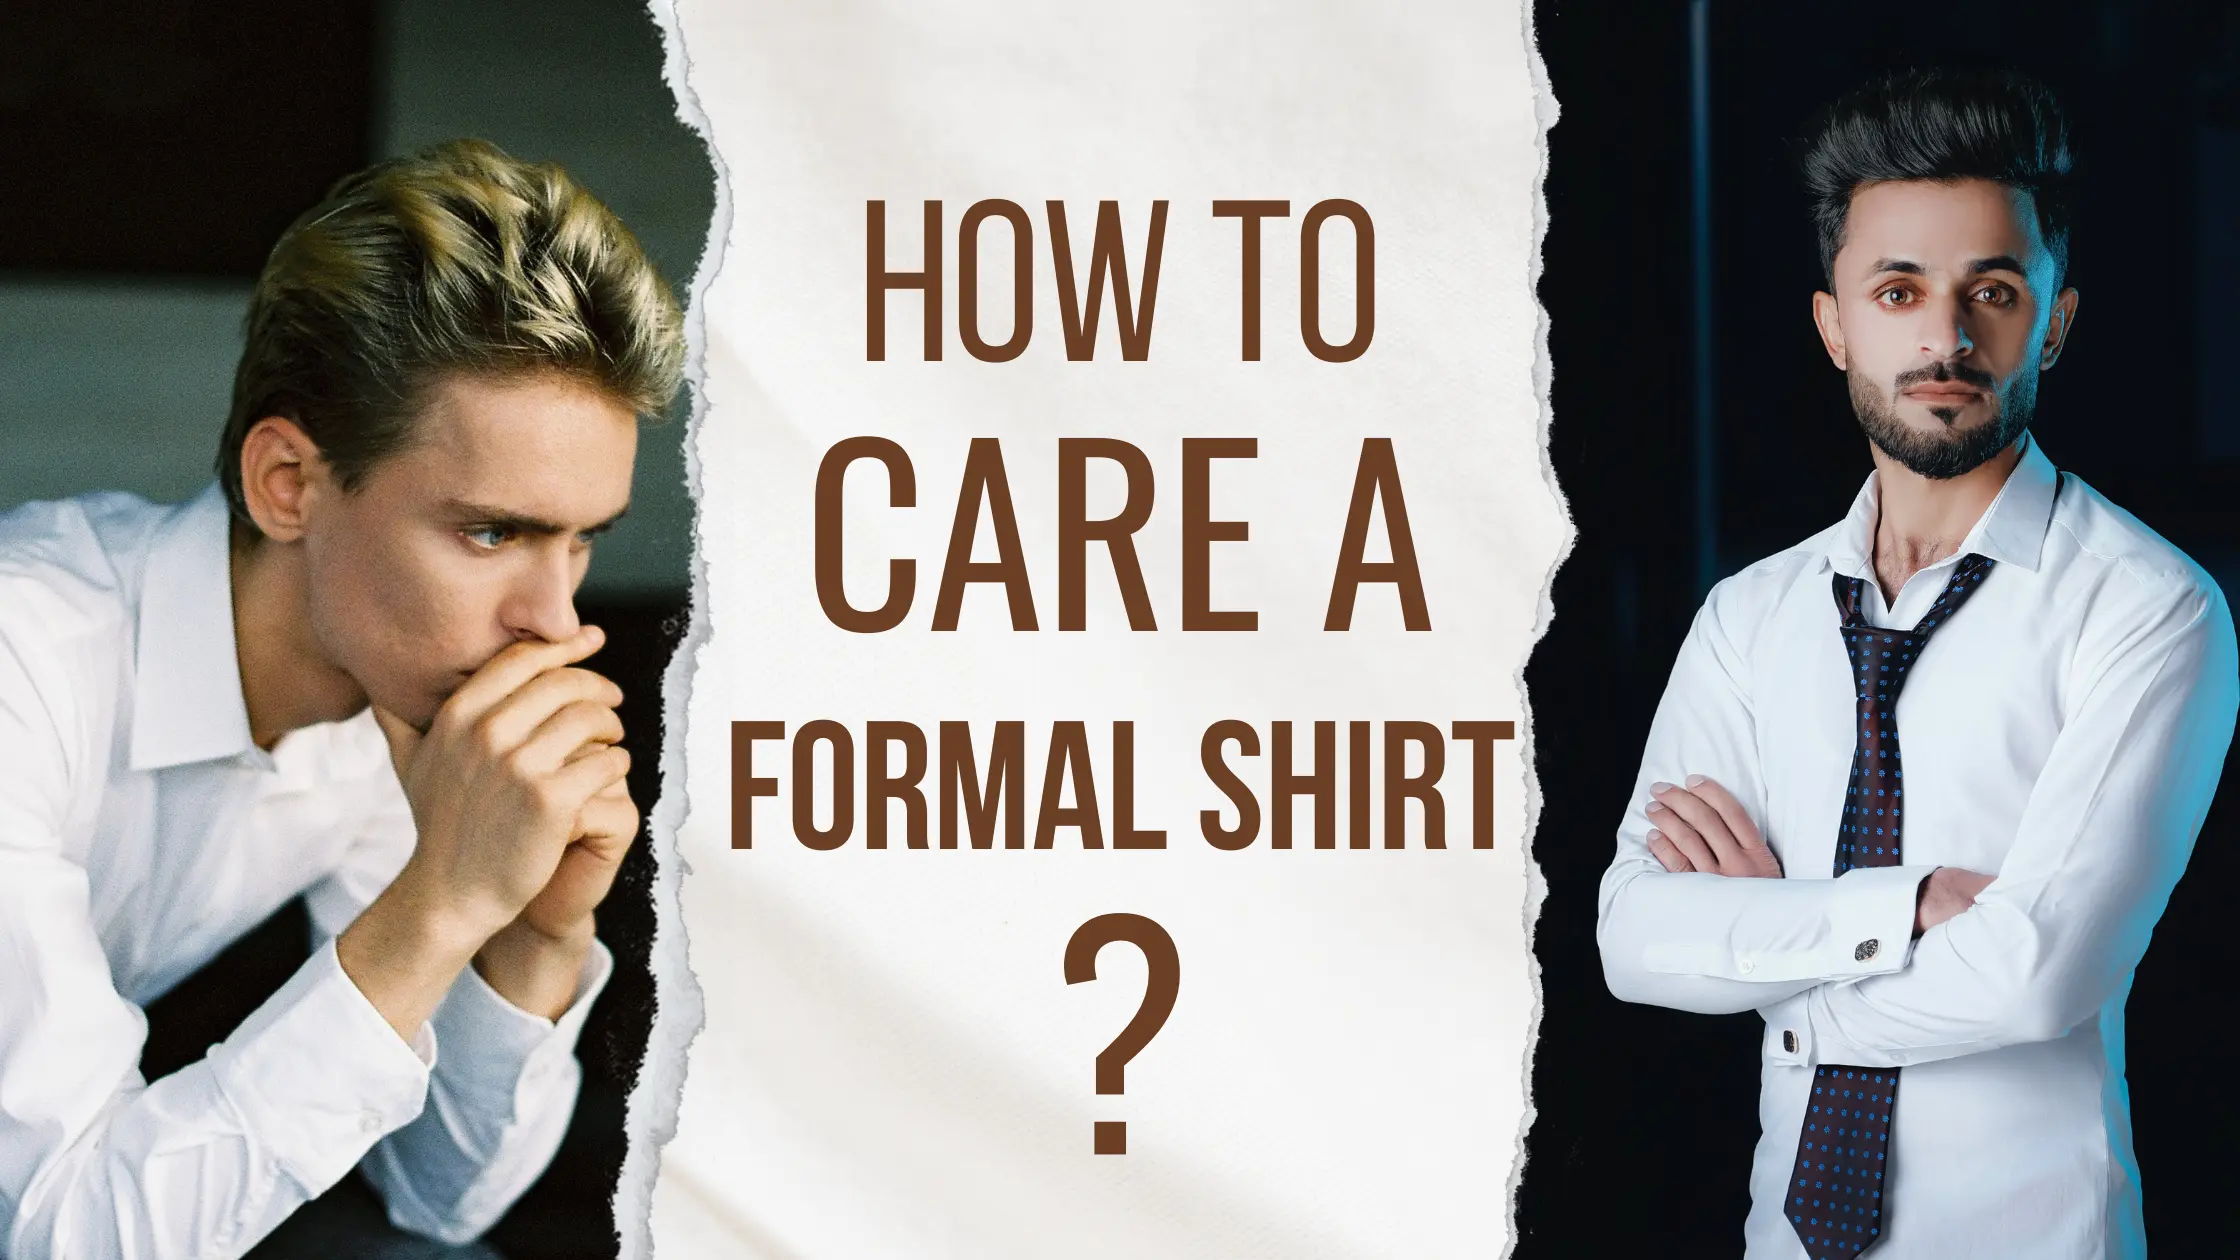 Taking care of formal shirts.